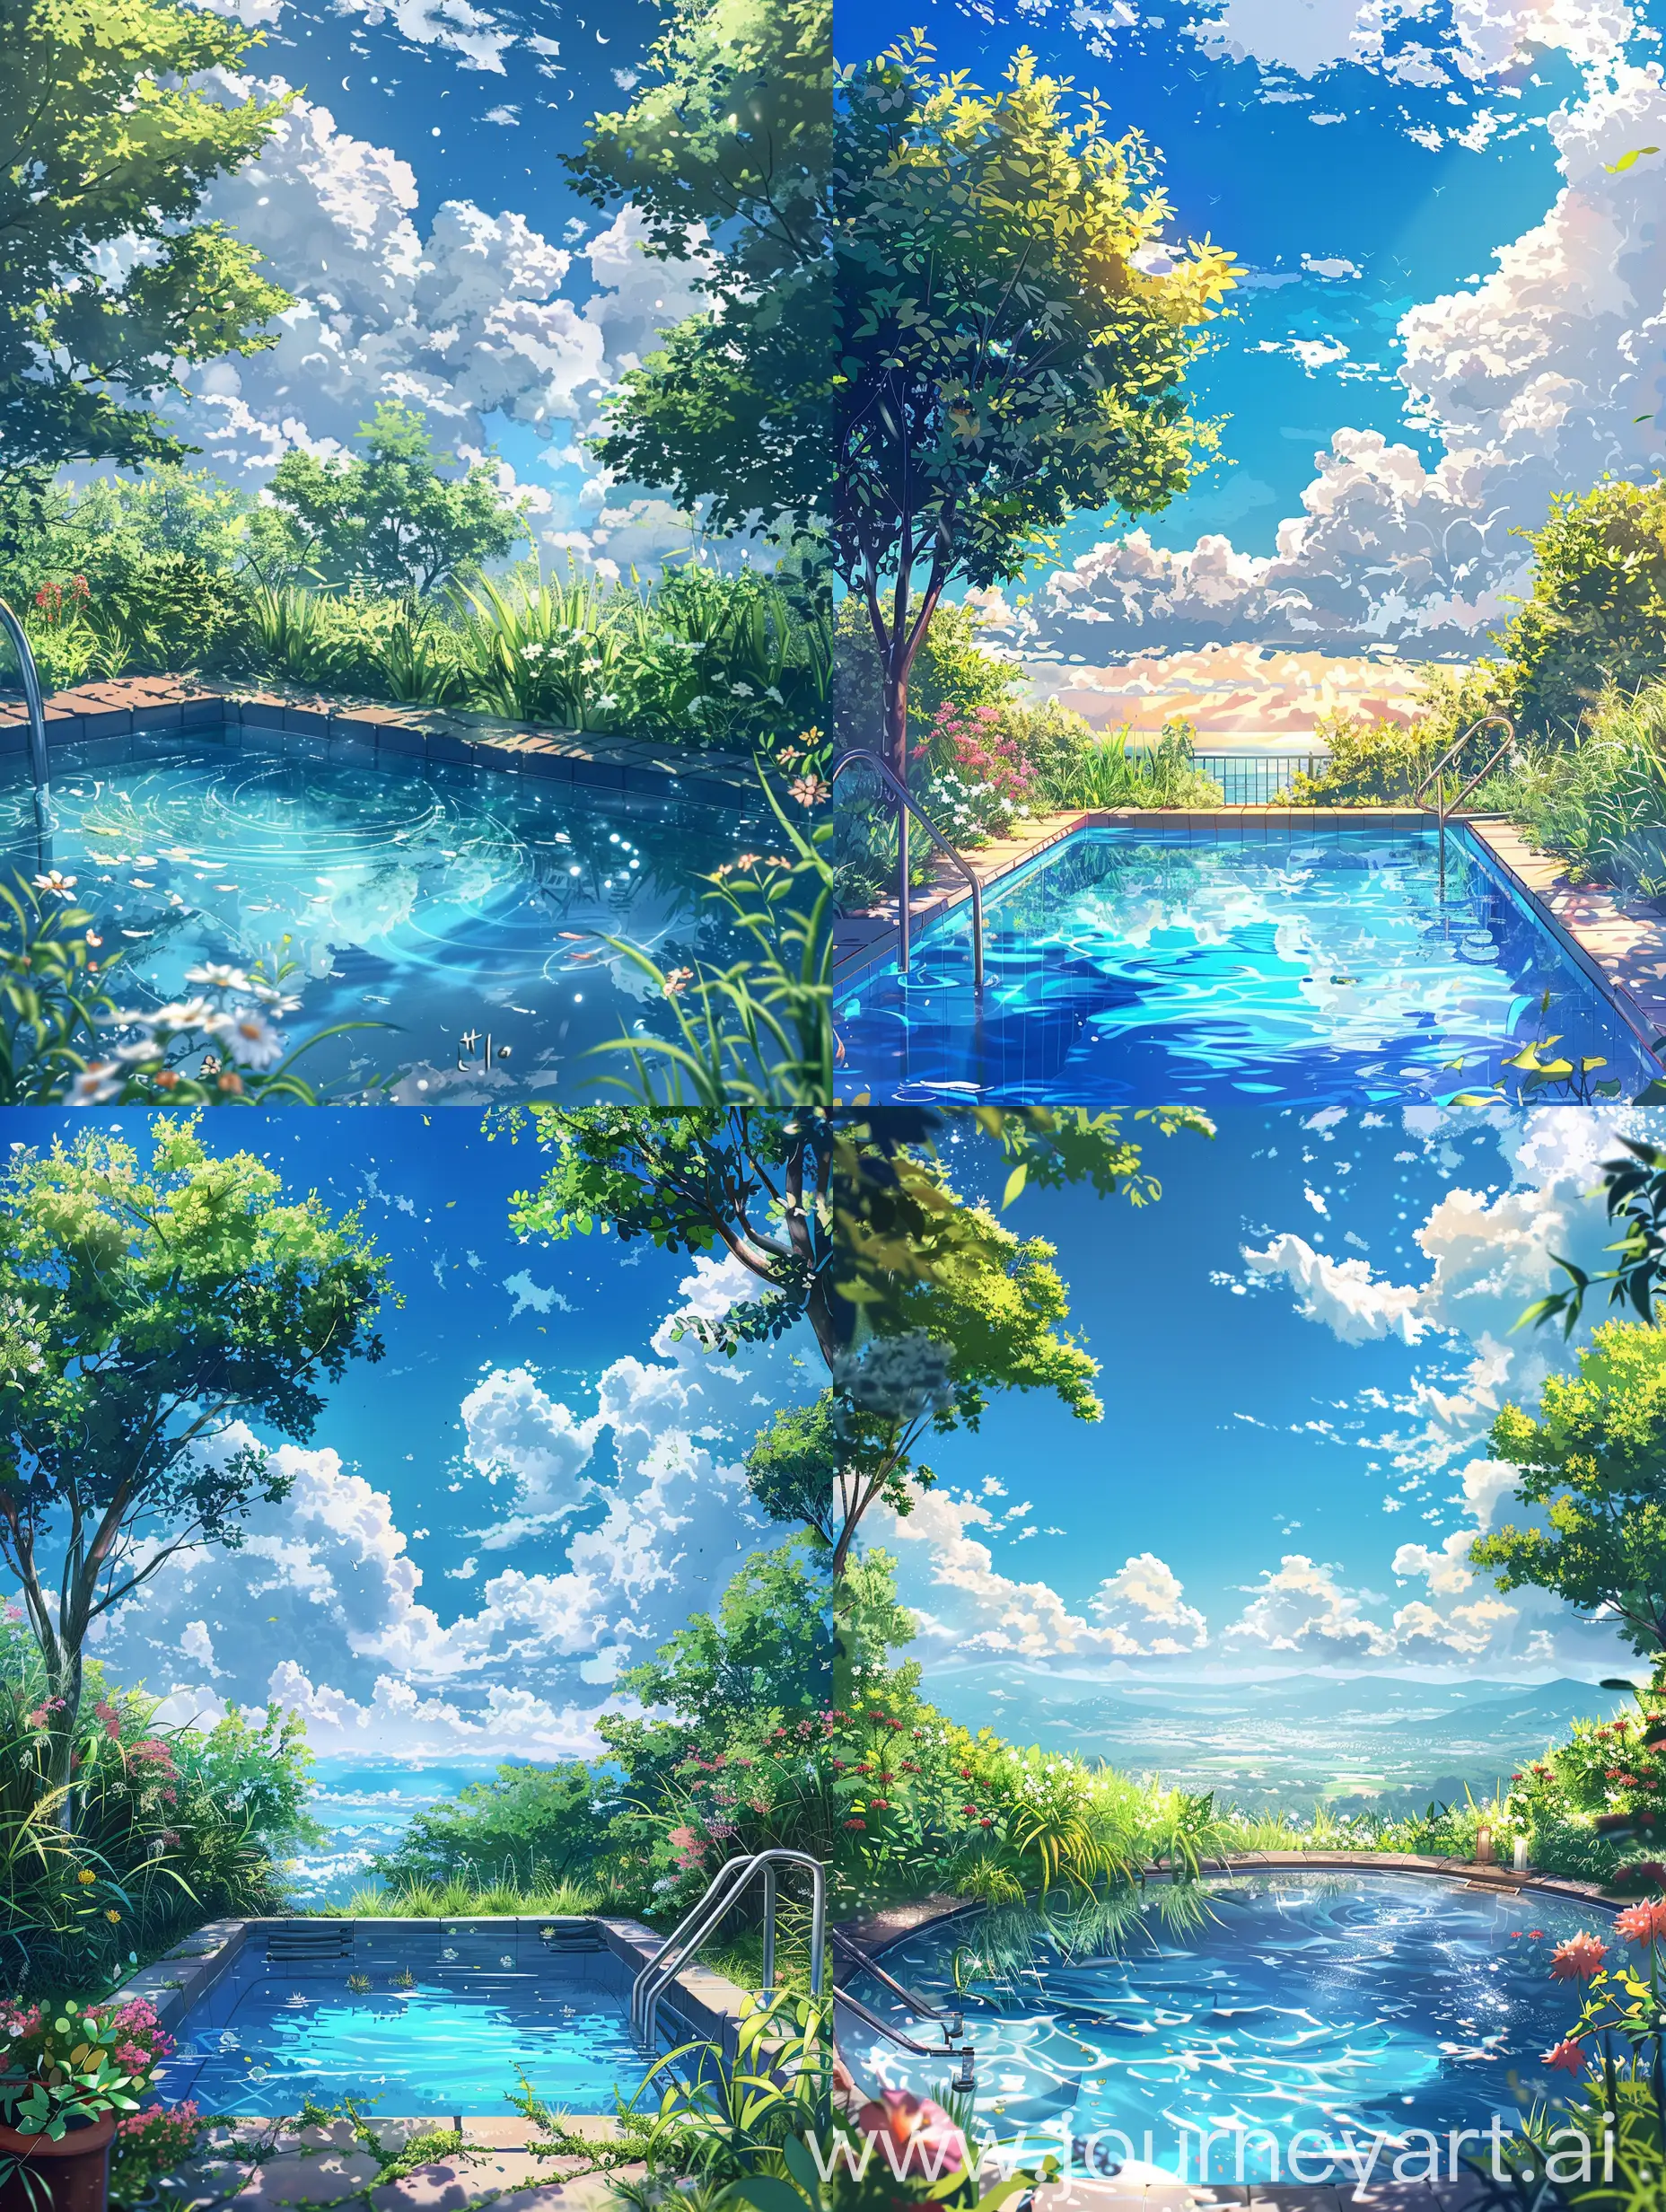 Beautiful anime style,beautiful summers,a nature made pool scene,windy,trees shed,a little bit of grass and flowers,beautiful sky,fluffy clouds,vibes,everything is highly detailed,best view,express summers beauty,cozy.